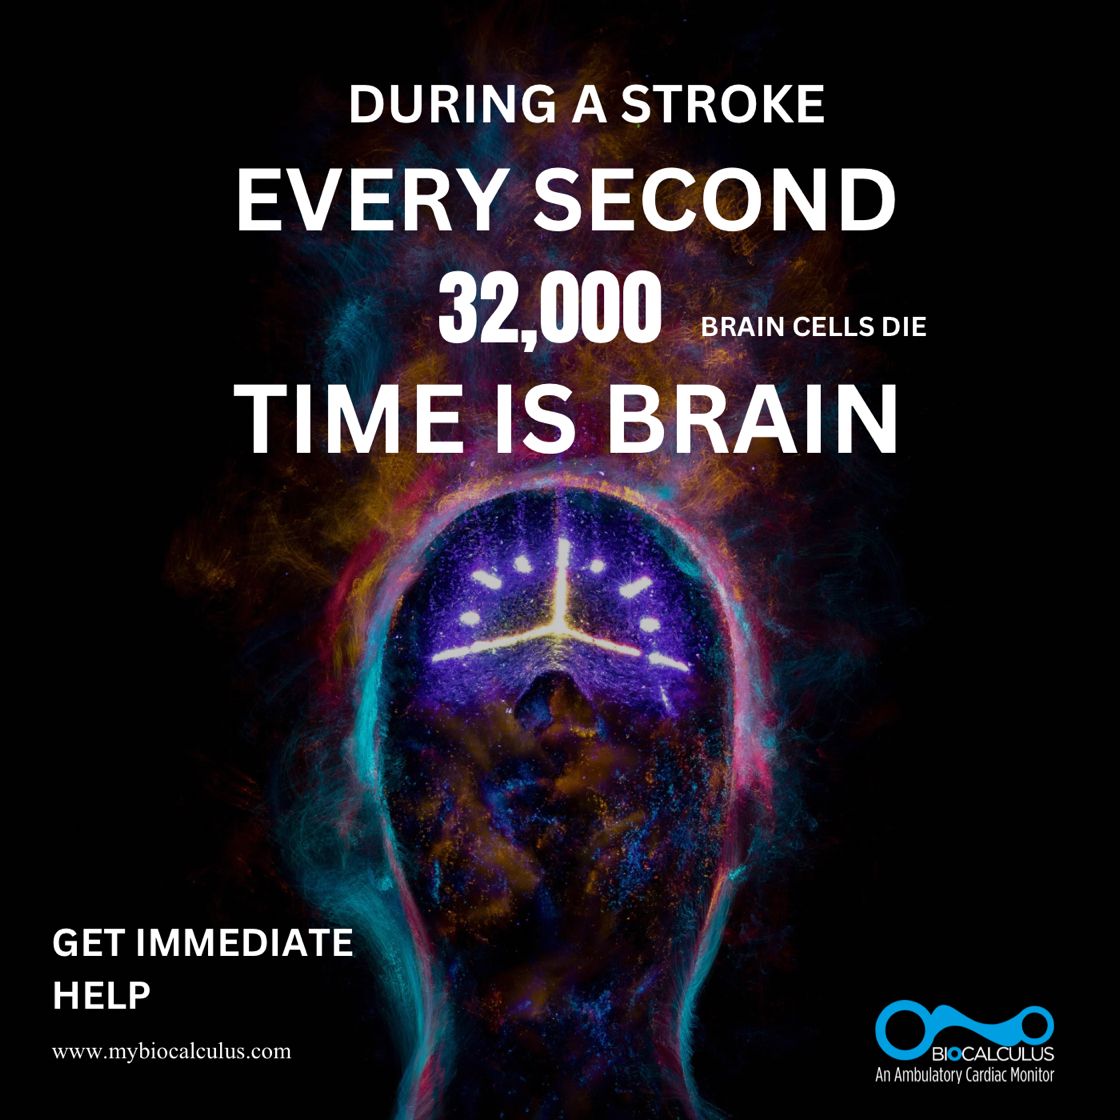 Every second counts: Learn the signs,
sudden numbness, confusion, trouble speaking and take swift action. Early intervention can save lives. For more on prevention click buff.ly/35Gzg30 #StrokeAwareness